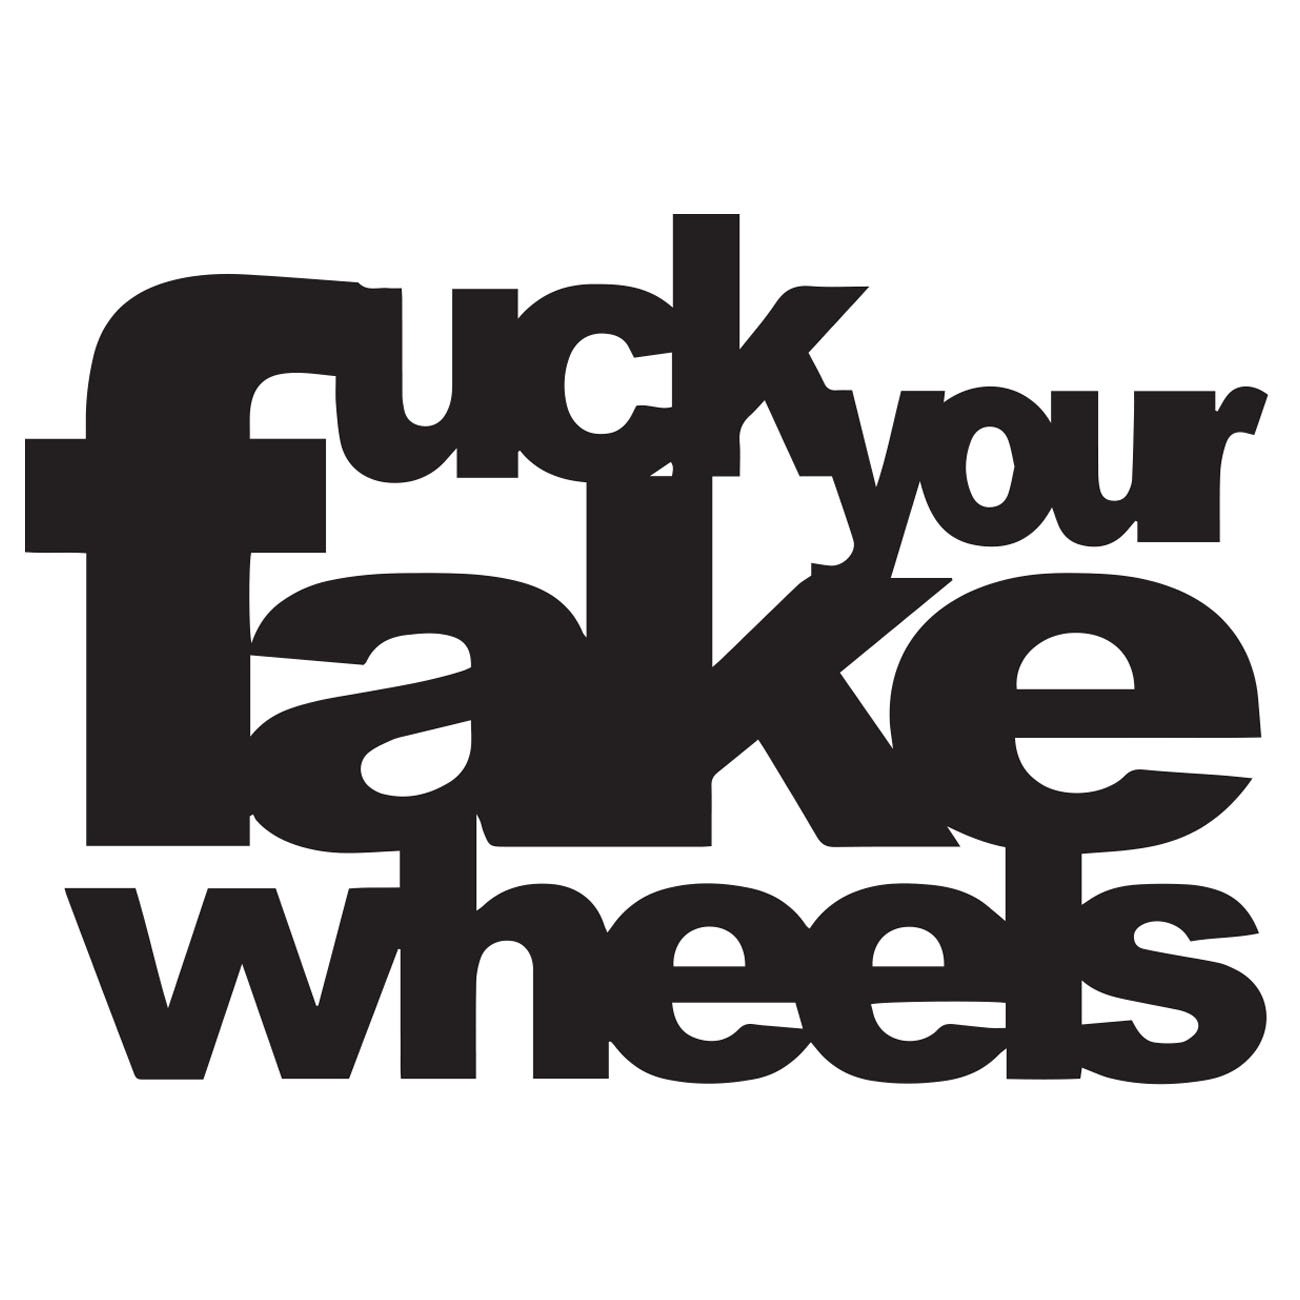 Fuck your fake wheels 2